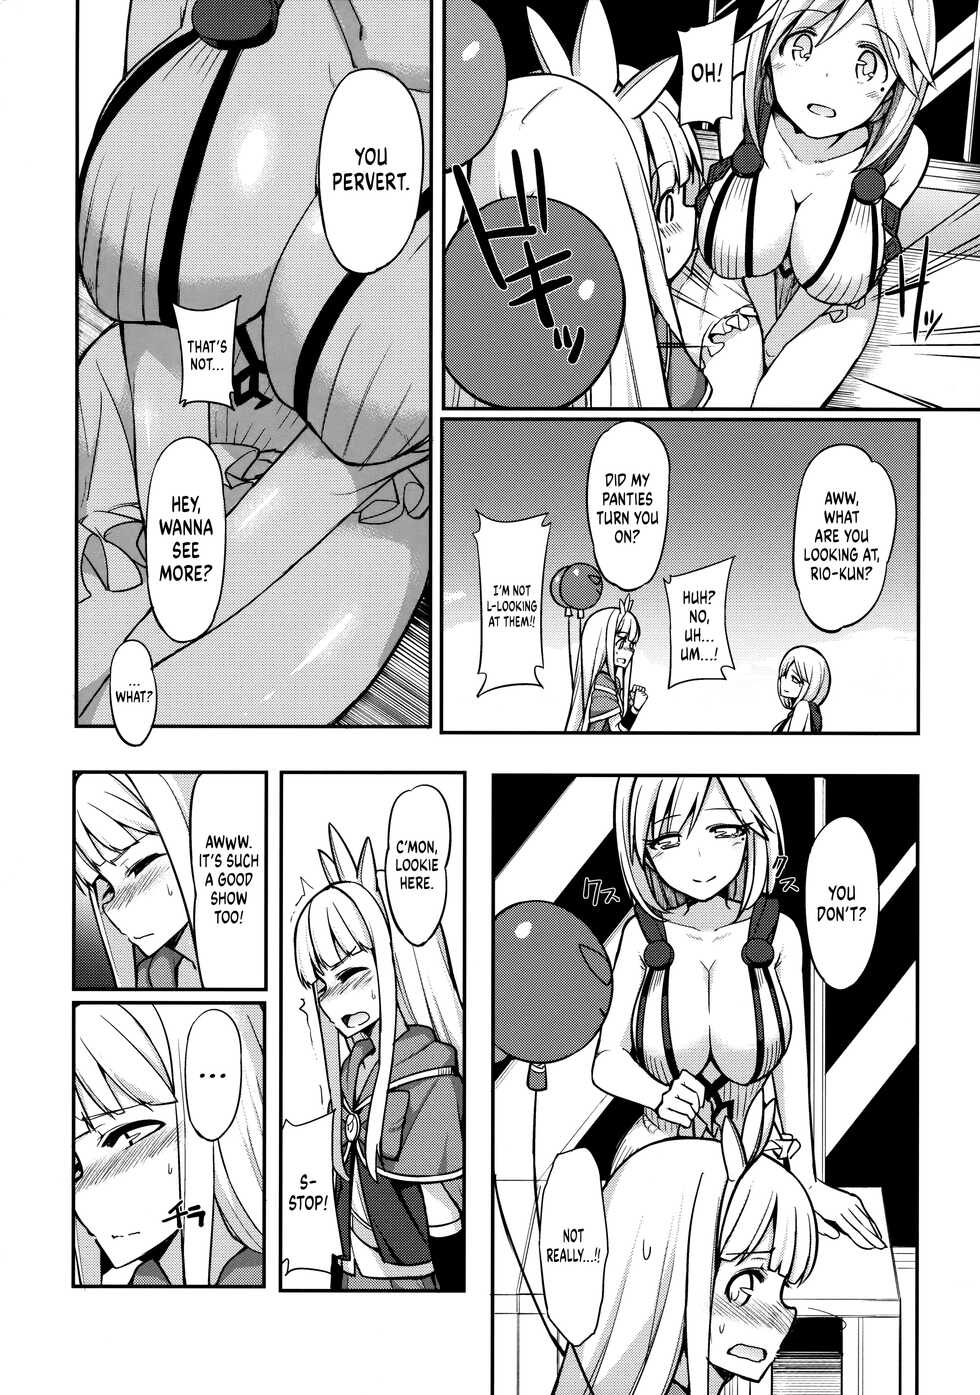 (SC2016 Winter) [H@BREAK (Itose Ikuto)] I Had a Cross Fate Episode at Comiket with an Onee-san I Met on Twitter and Spurted out Something Super Thick (Granblue Fantasy) [English] [head empty] - Page 5